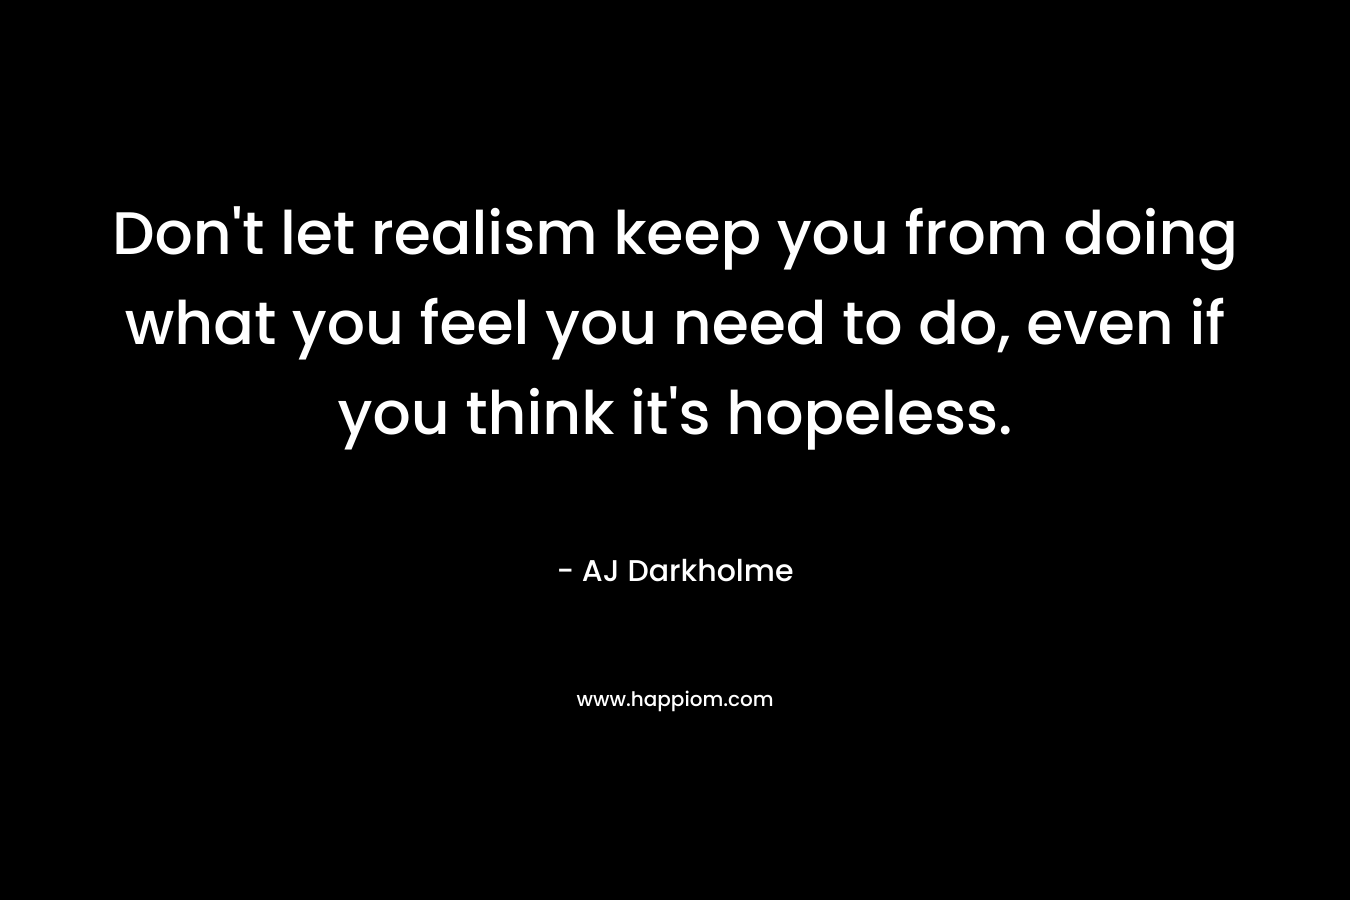 Don't let realism keep you from doing what you feel you need to do, even if you think it's hopeless.